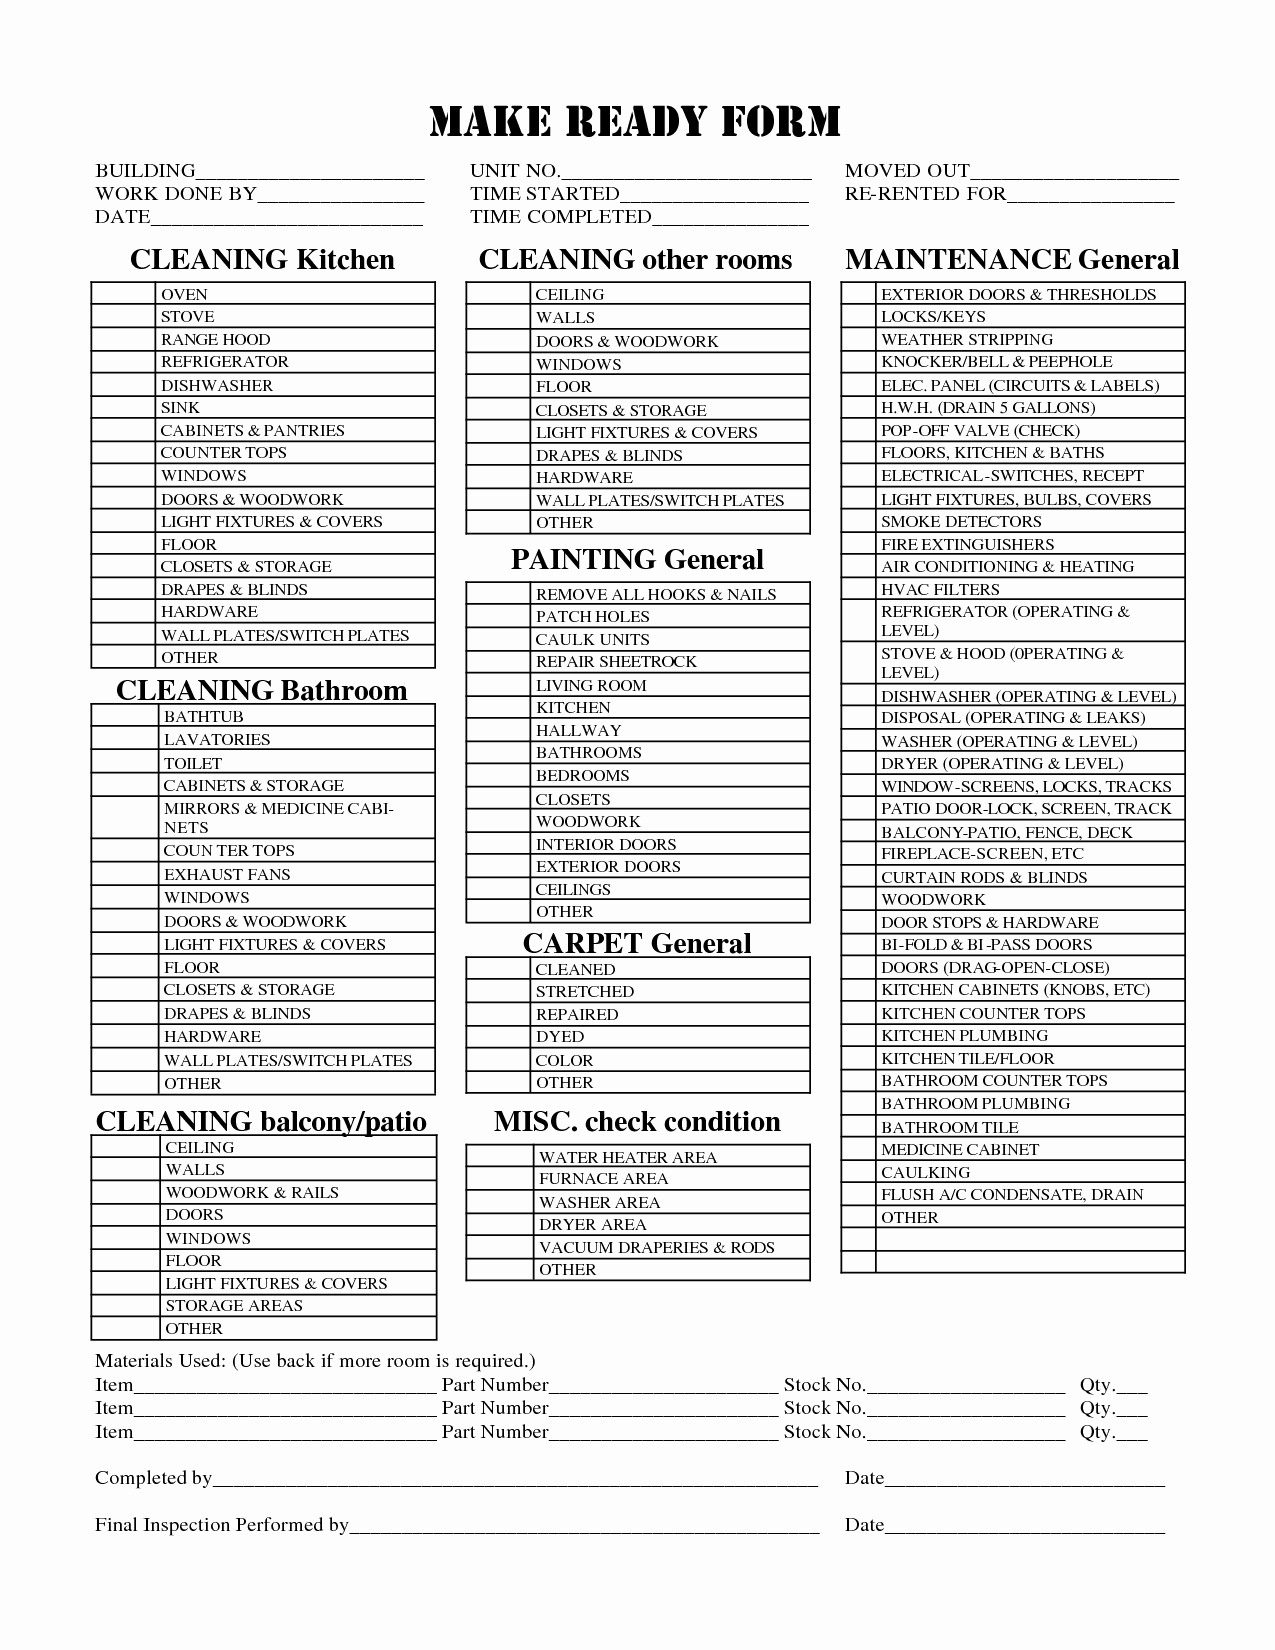 Free Property Management forms Templates Inspirational Check List for Apartment Make Ready Google Search